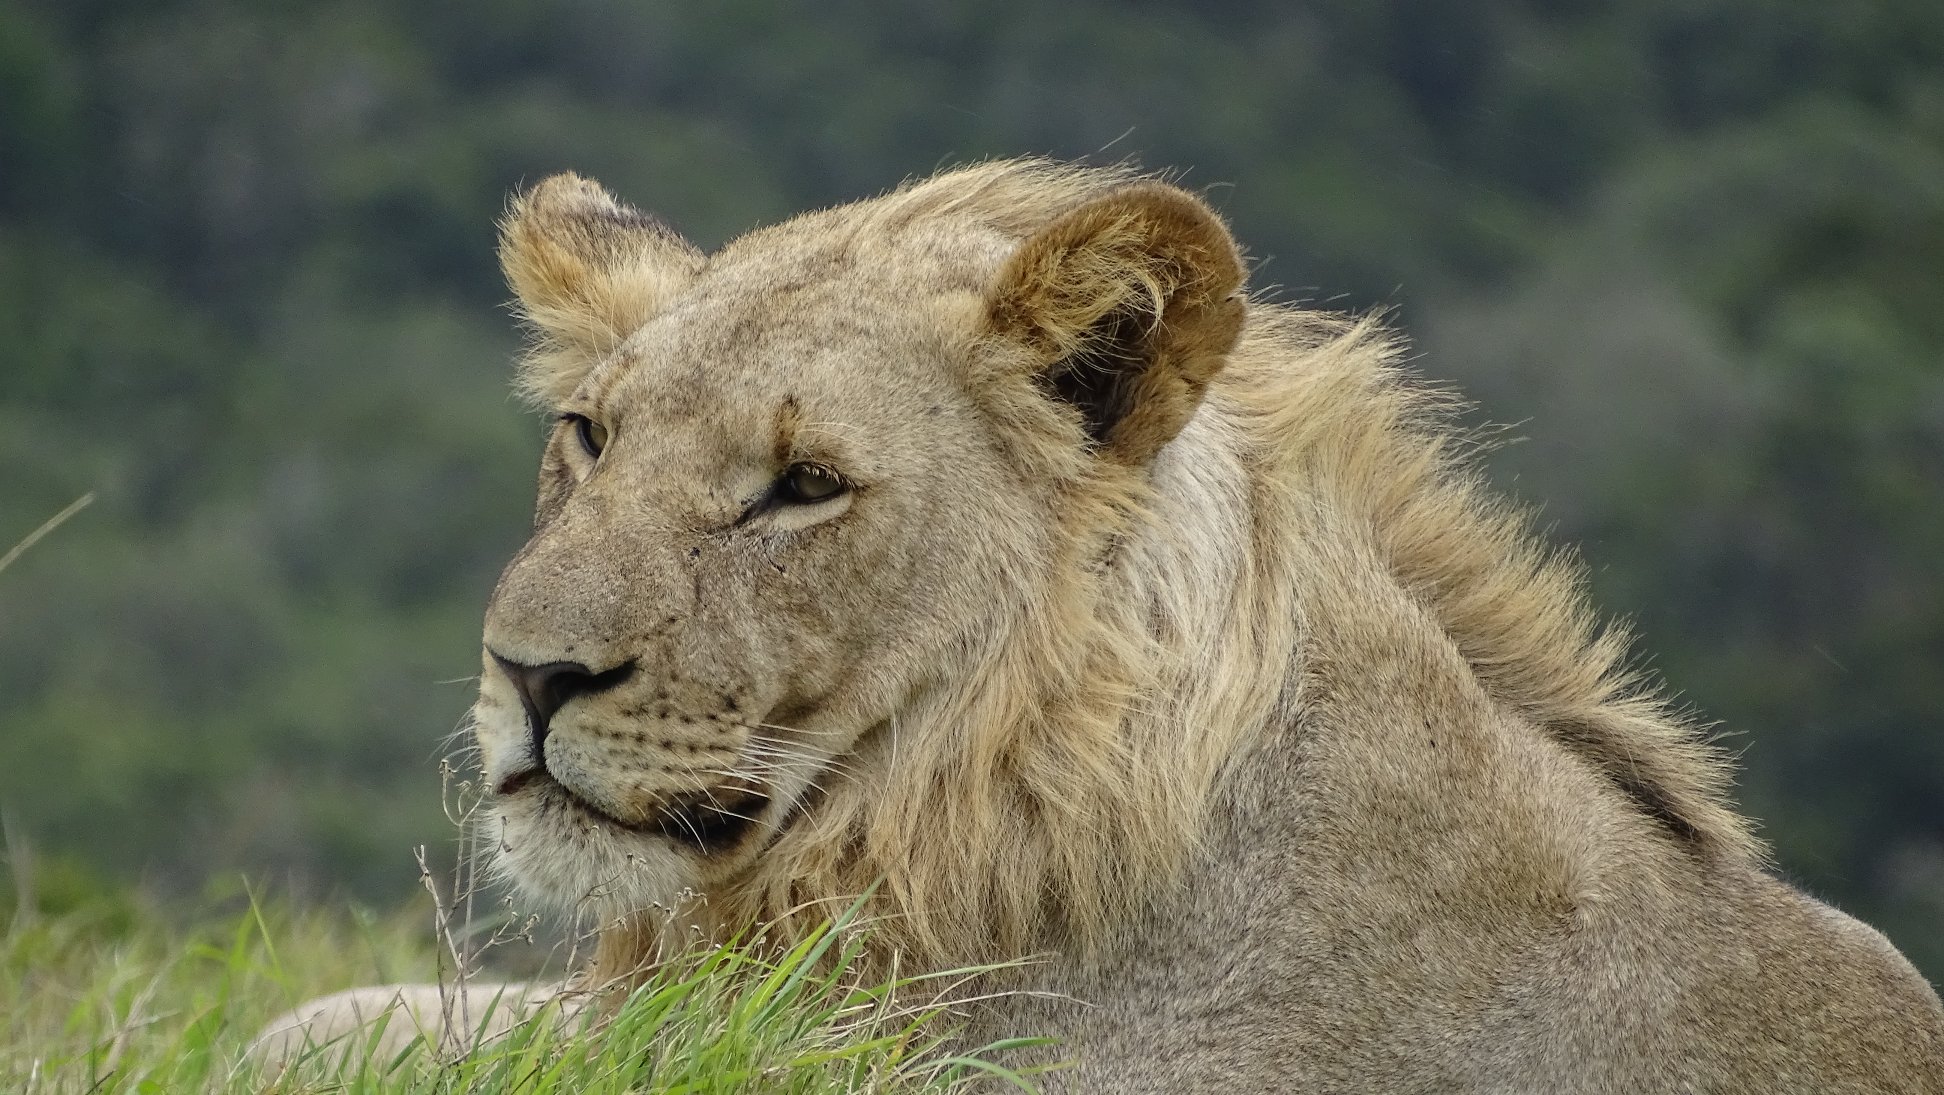 A juvenile male lion, image taken by 2022 photo competition finalist Britta Rieblinng 